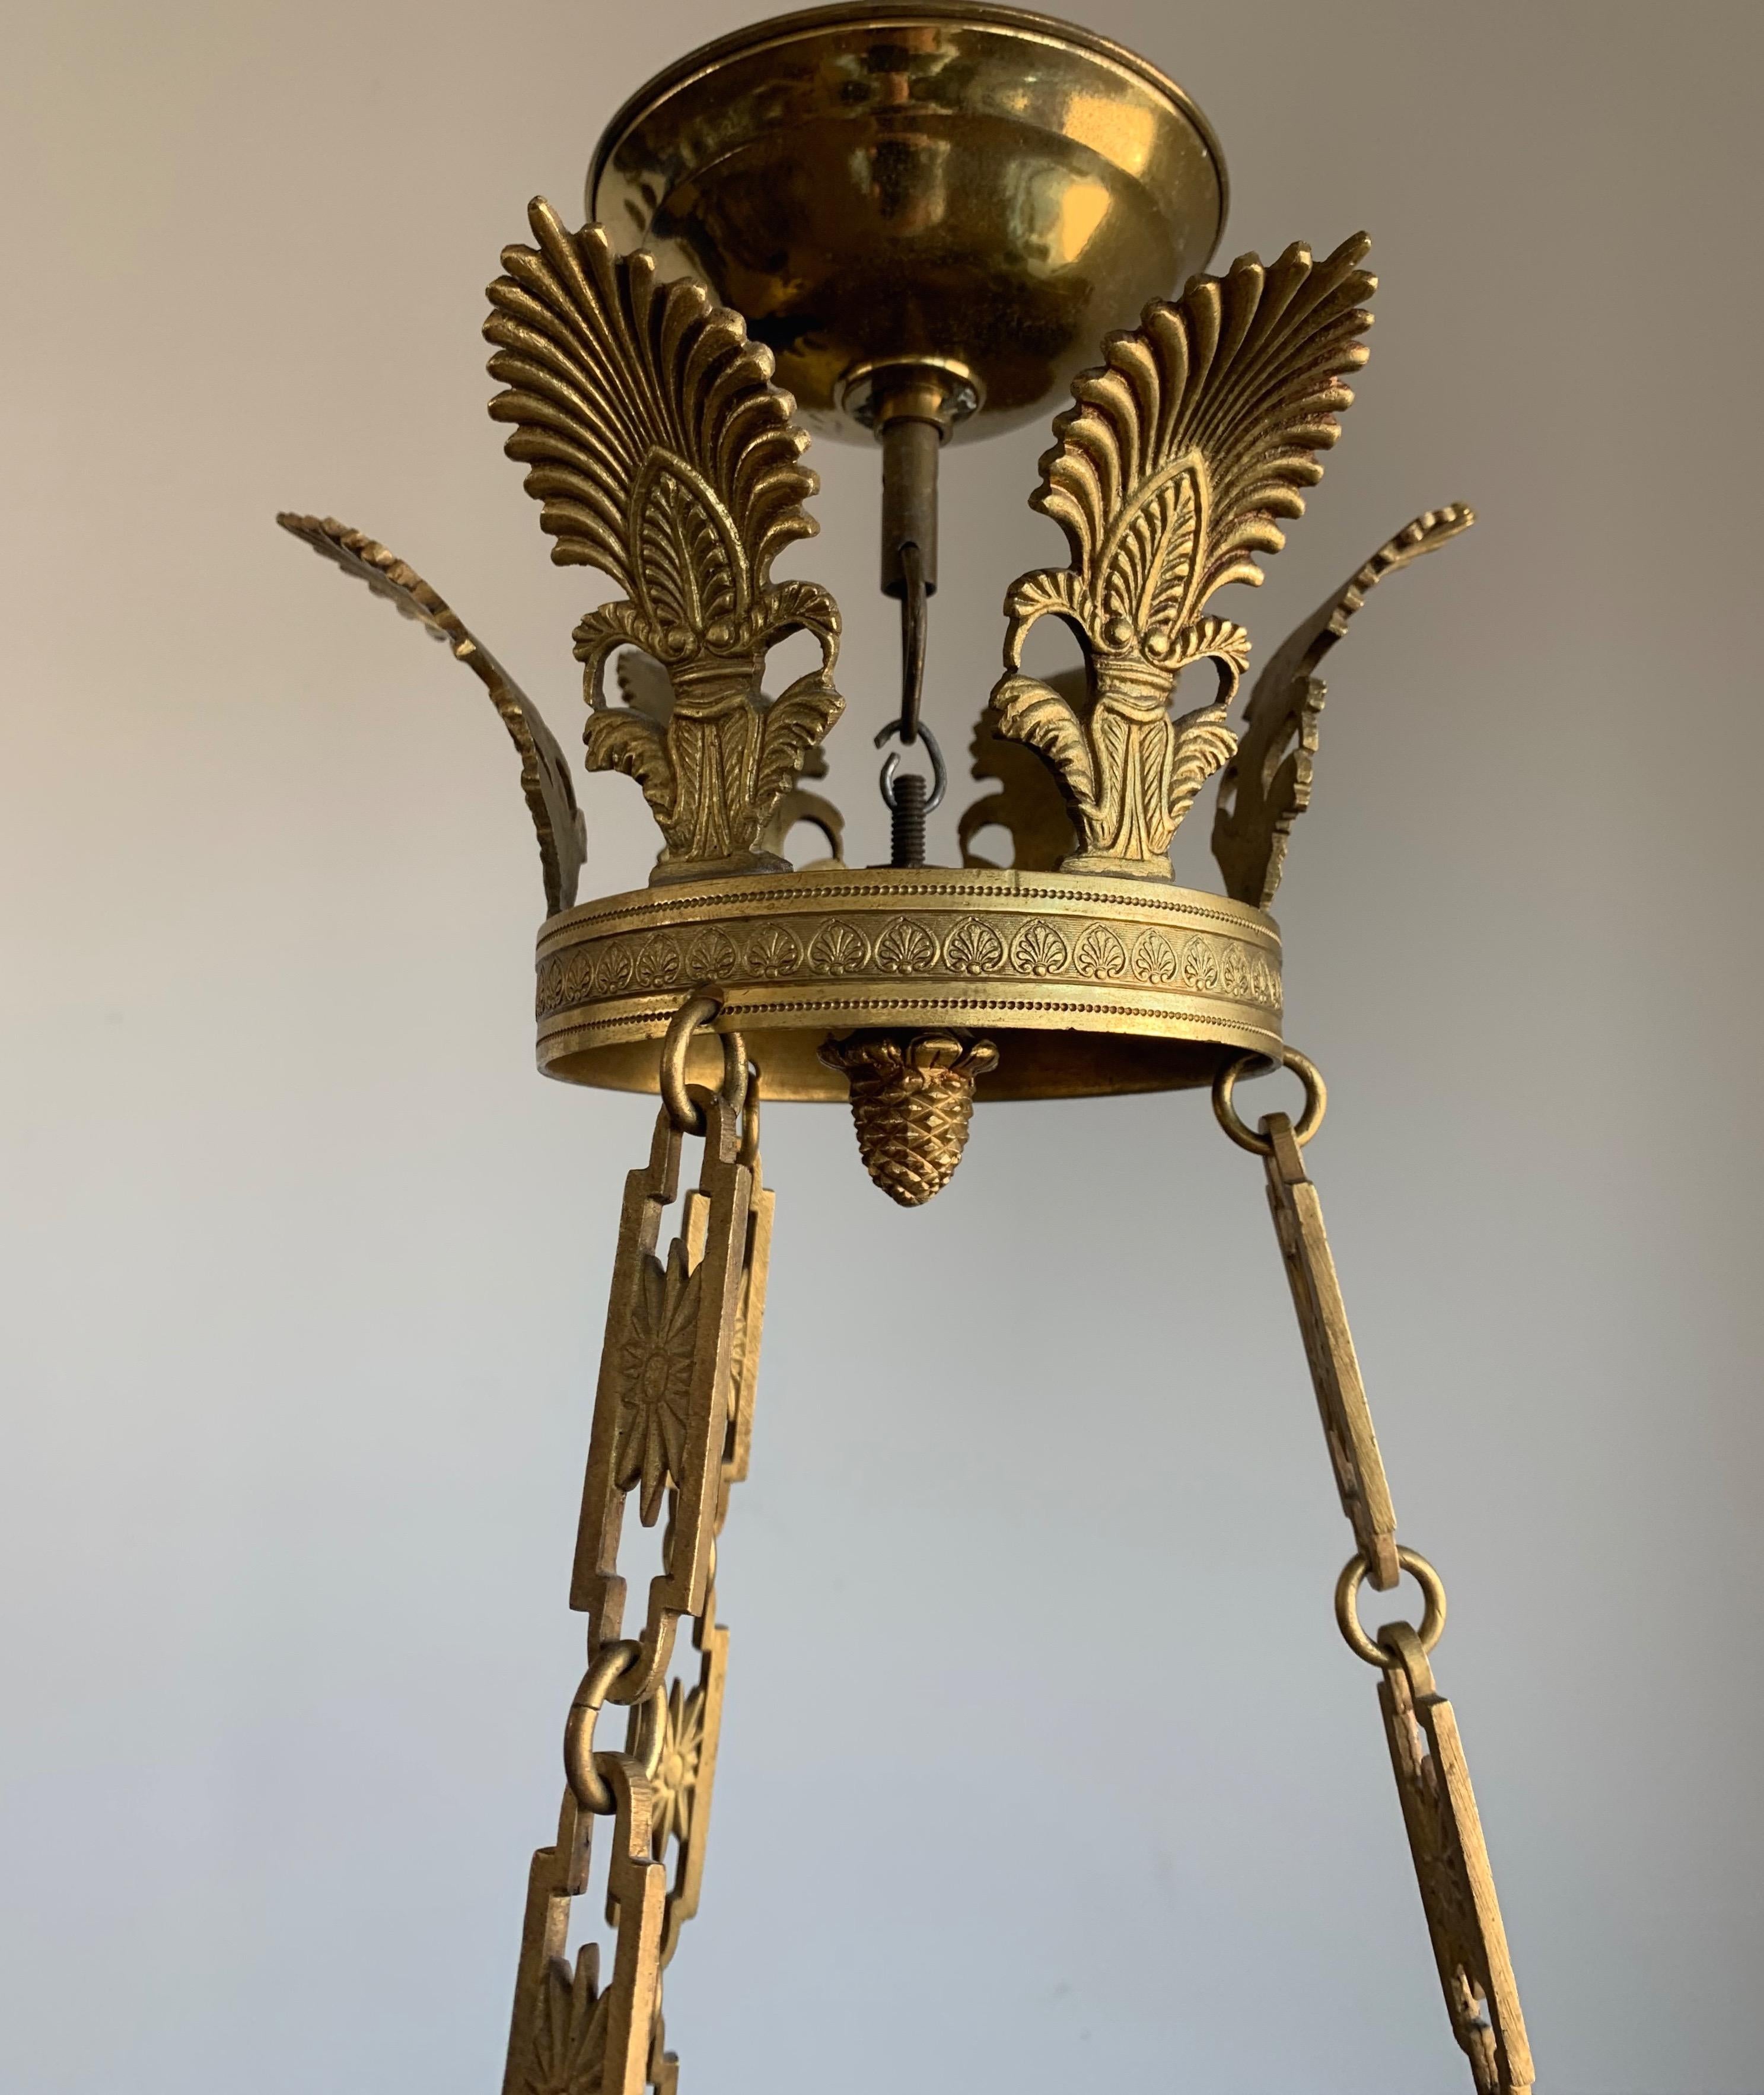 Antique French Empire Gilt Bronze Candle Pendant Light or Chandelier with Cherub For Sale 5